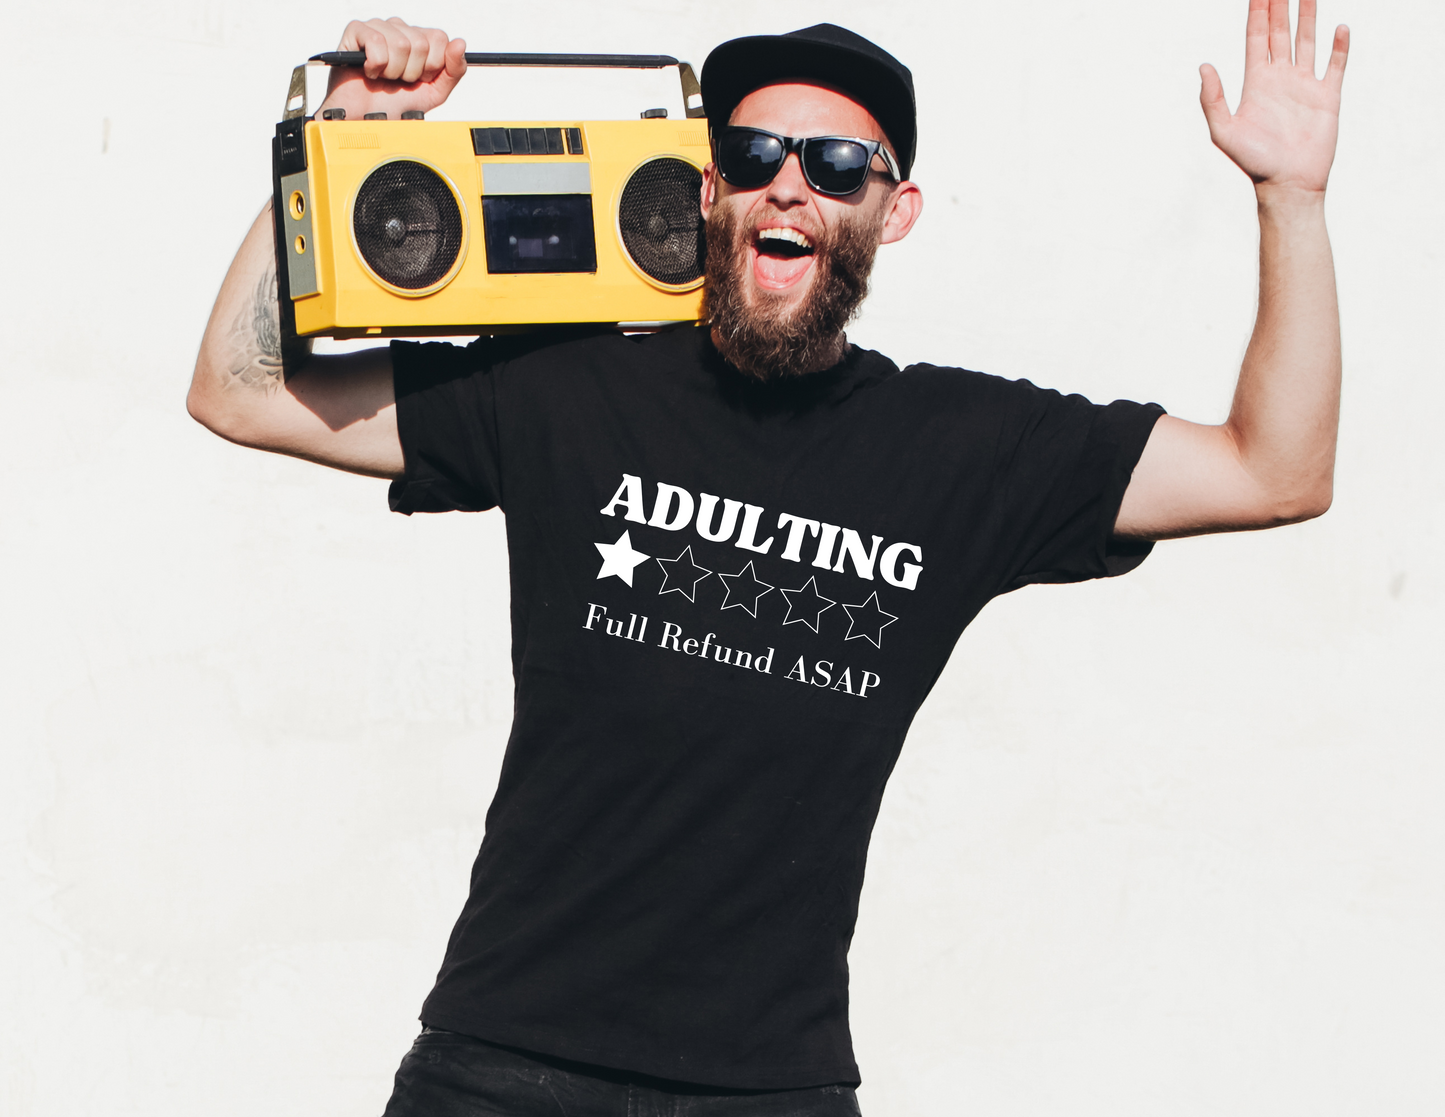 Unisex Adulting 1 Star Rating T-Shirt